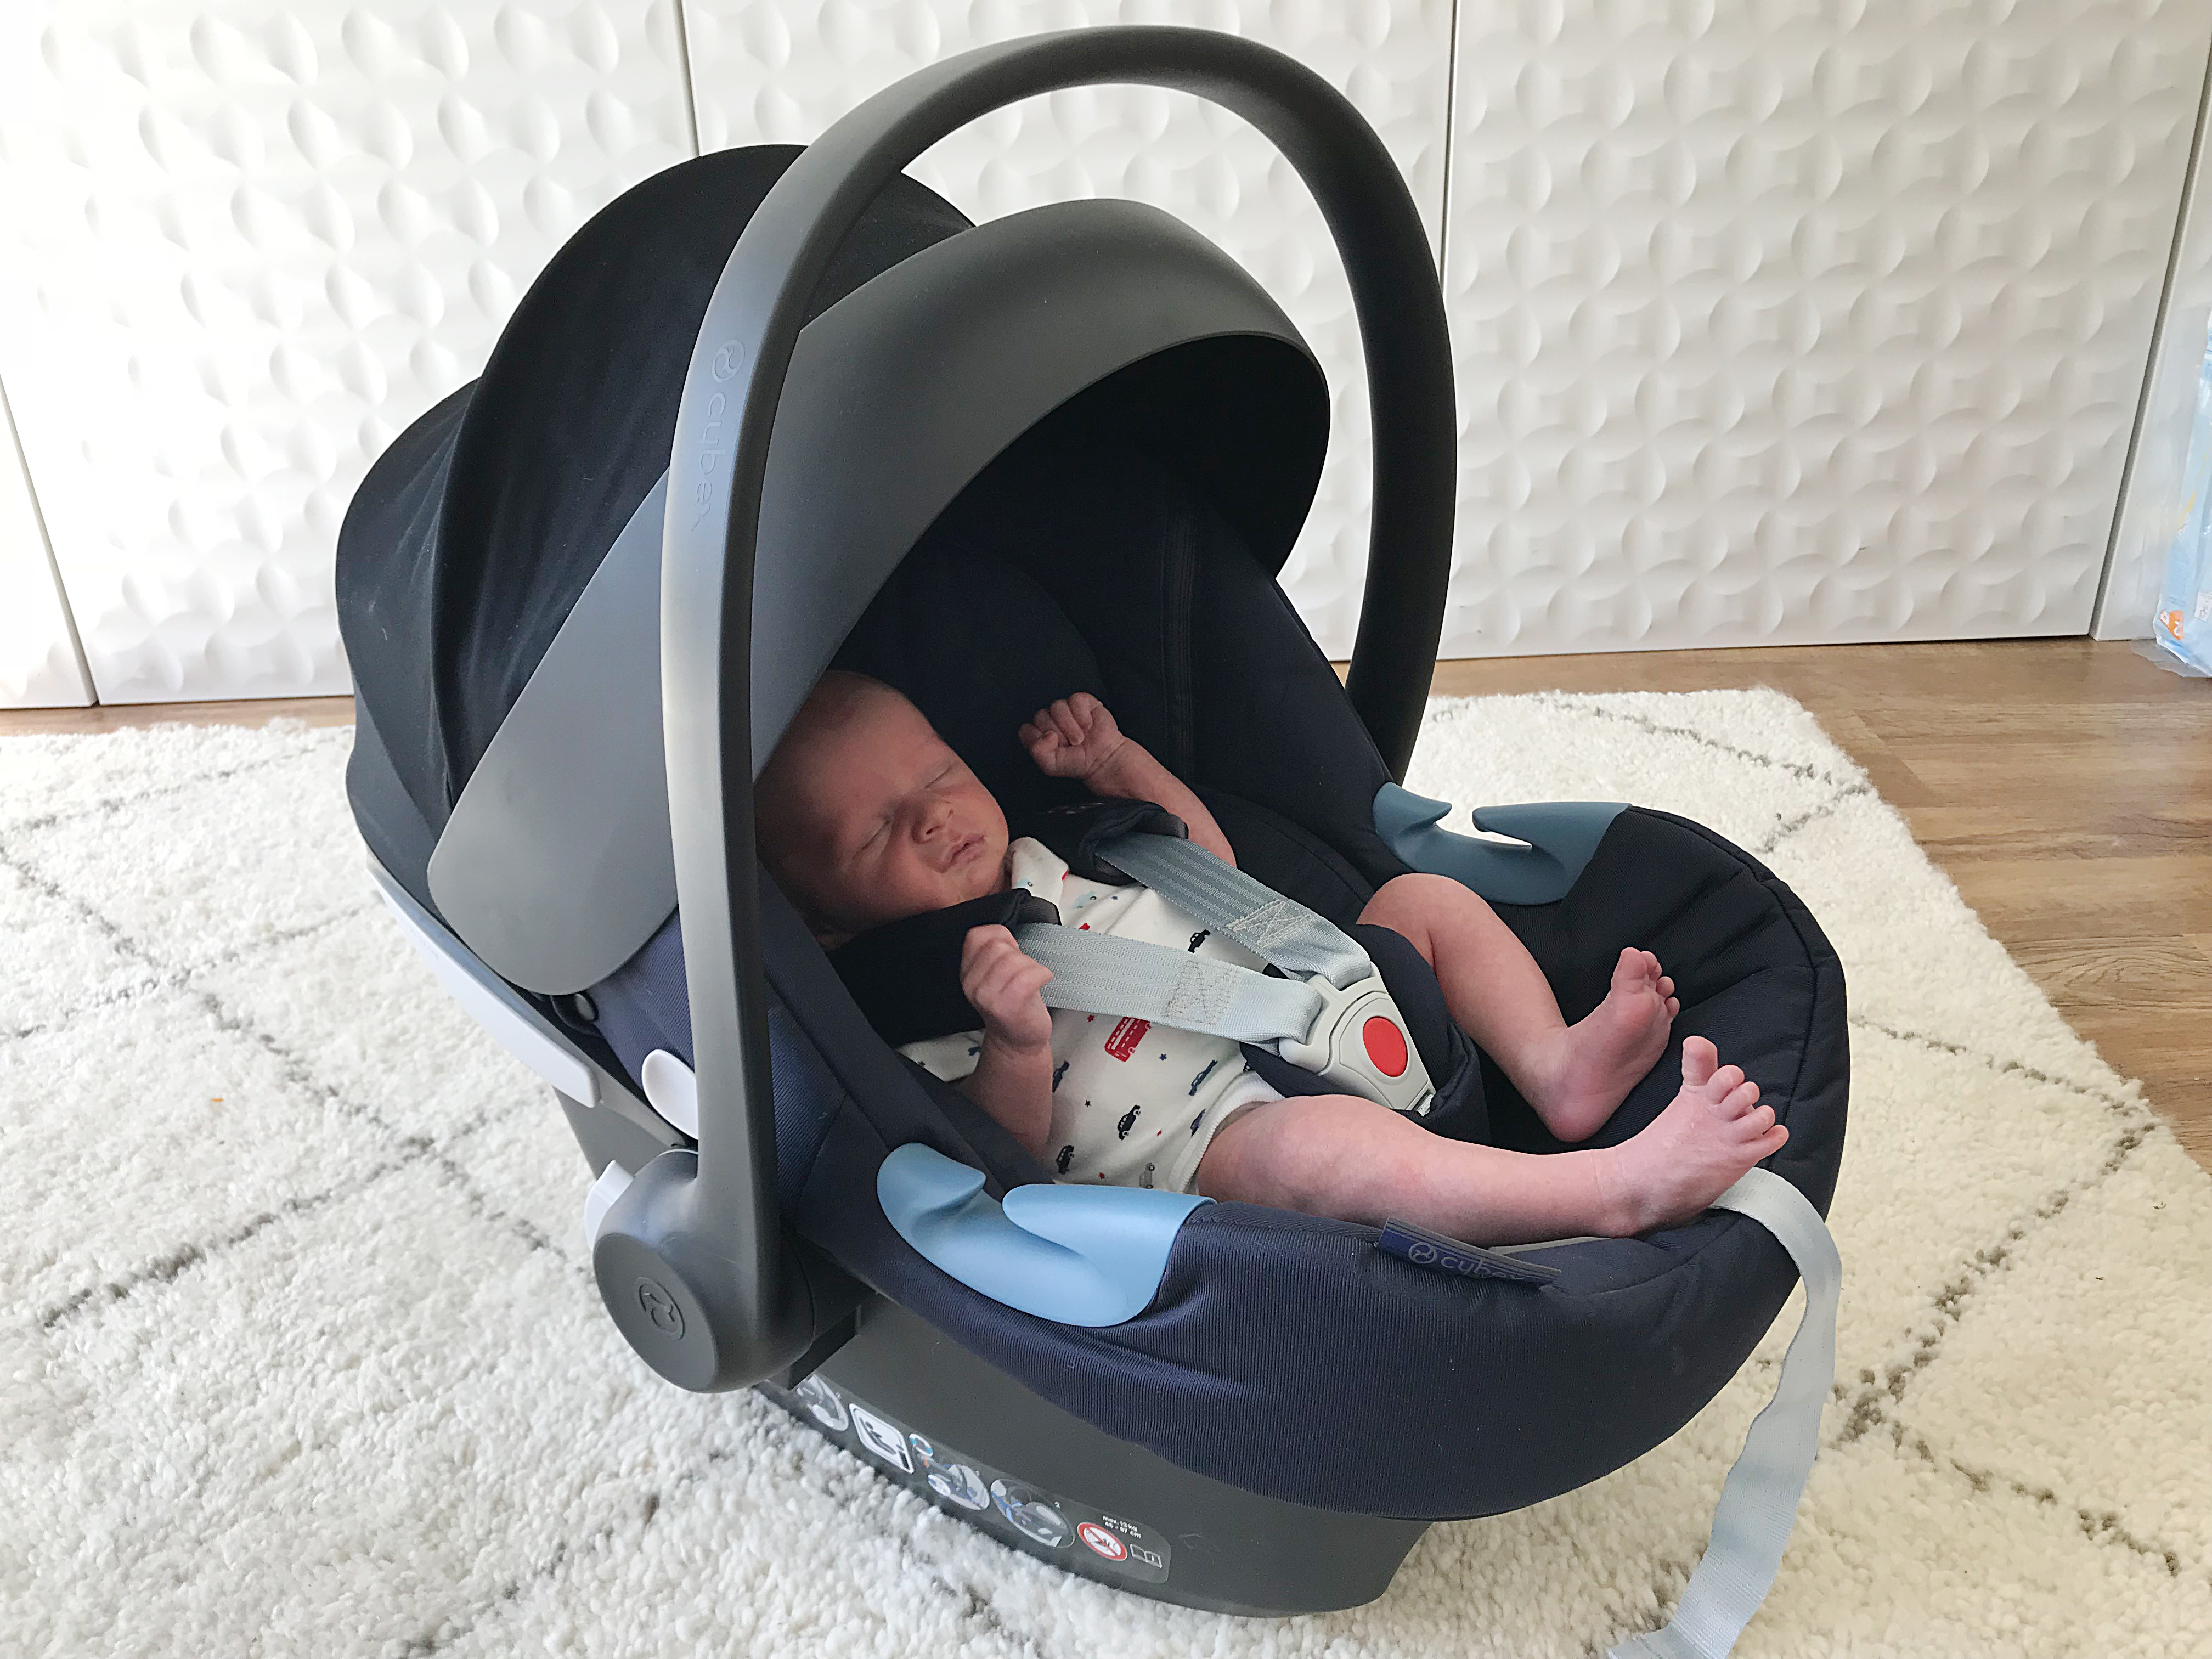 A newborn baby in a Cybex infant carrier car seat